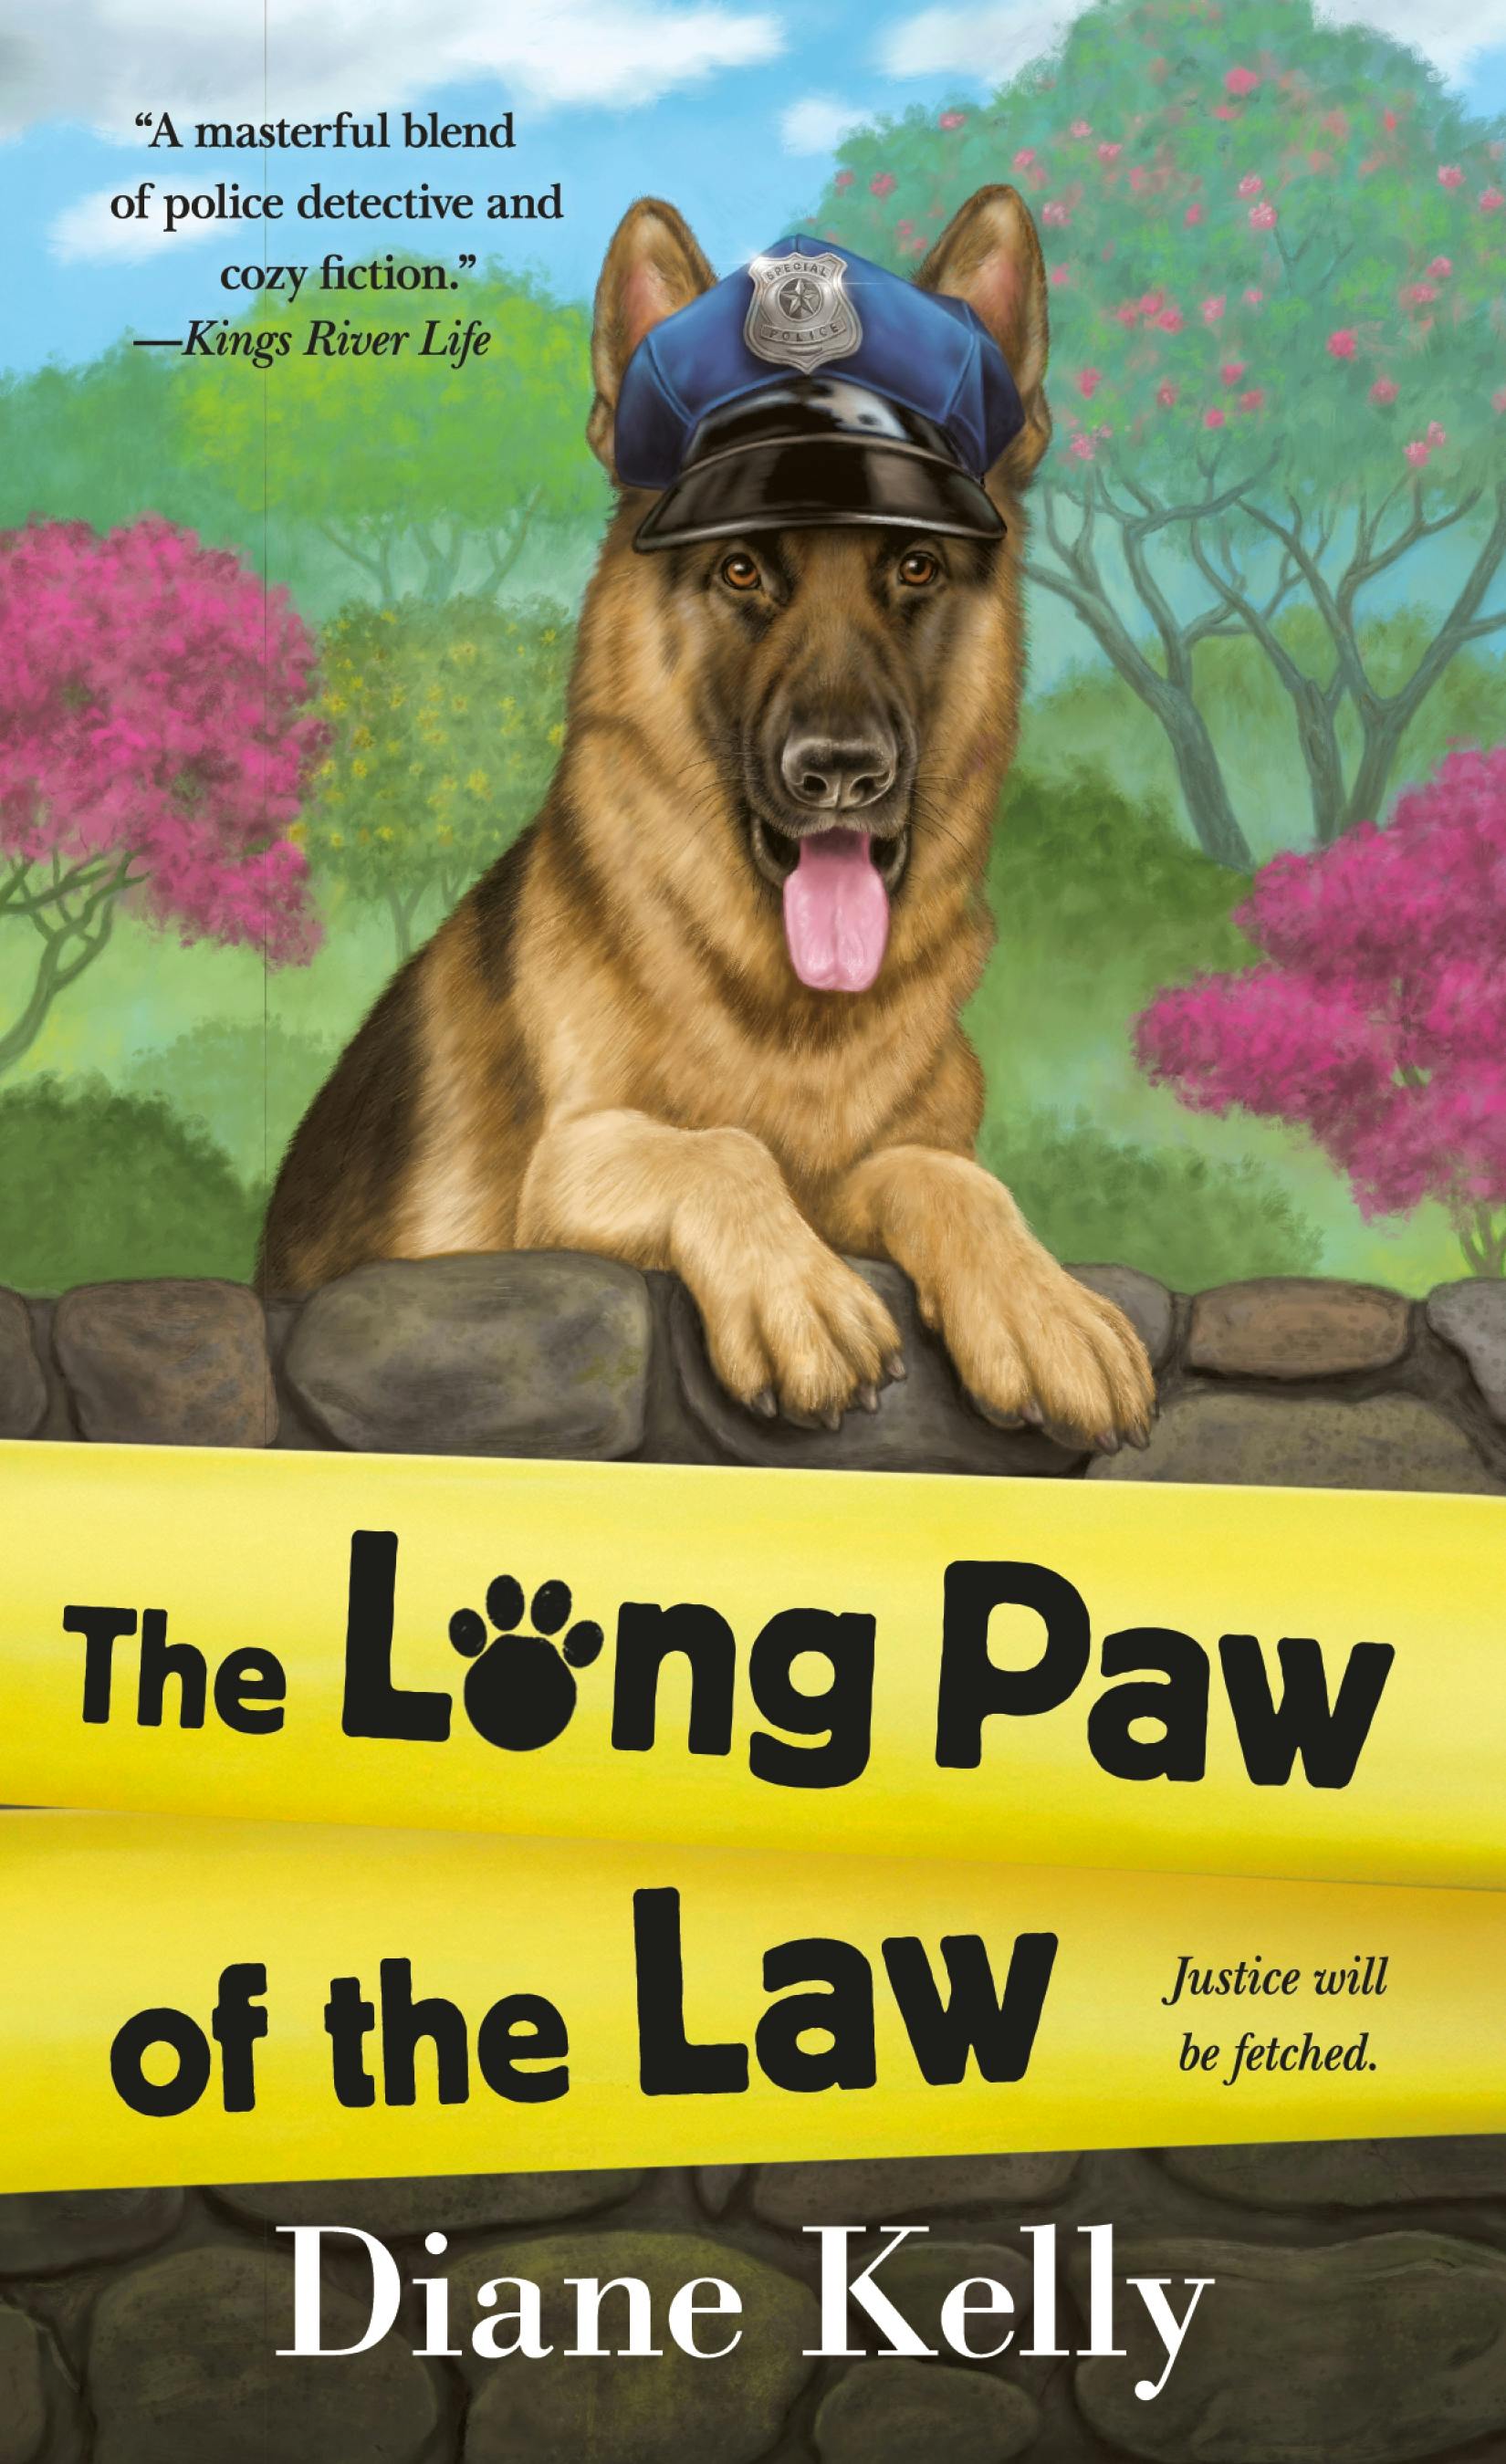 Image of The Long Paw of the Law